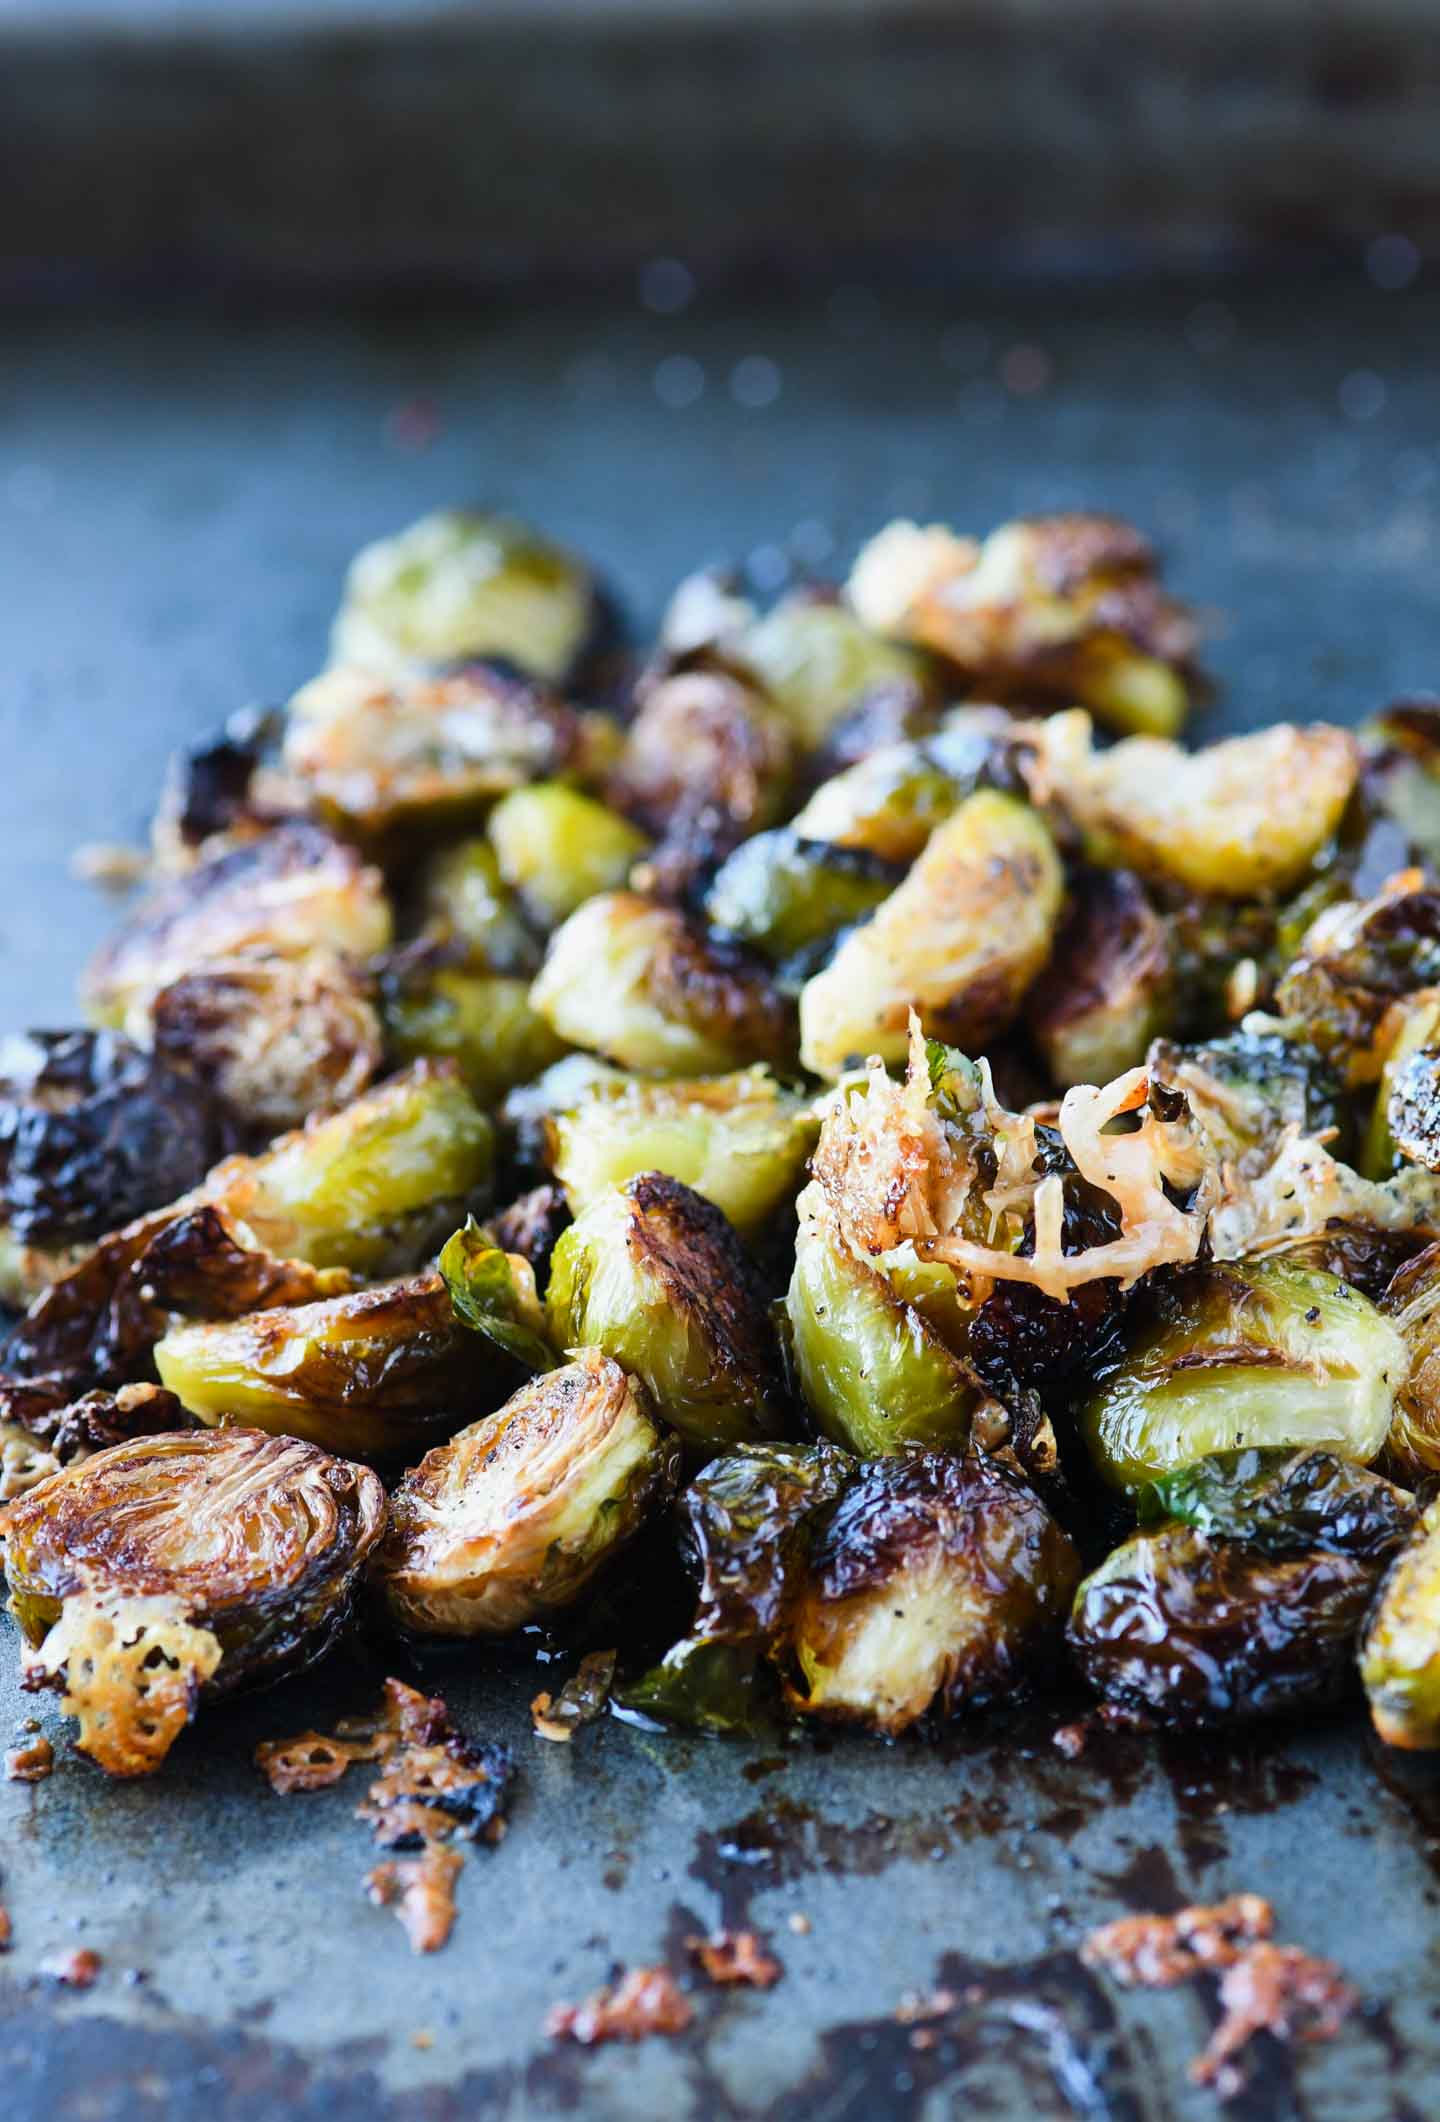 These crispy roasted brussels sprouts topped with parmesan and pomegranate simple syrup will give new meaning to the words side dish!  